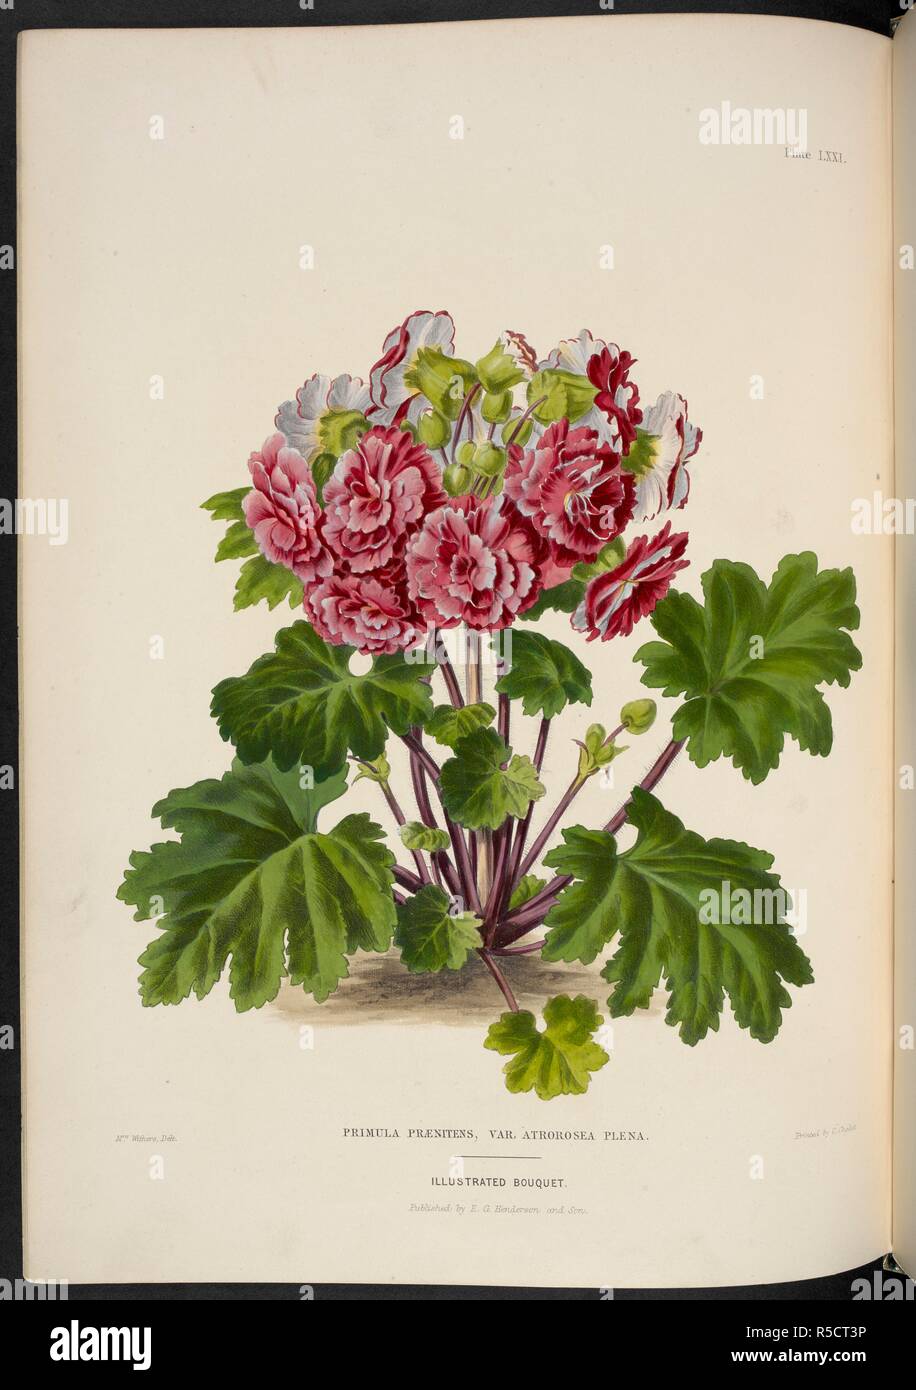 Primula PrÃ¦nitens, Var Atrorosea Plena. Chinese Primose. . The Illustrated Bouquet, consisting of figures, with descriptions of new flowers. London, 1857-64. Source: 1823.c.13 plate 71. Author: Henderson, Edward George. Withers, Mrs. Stock Photo